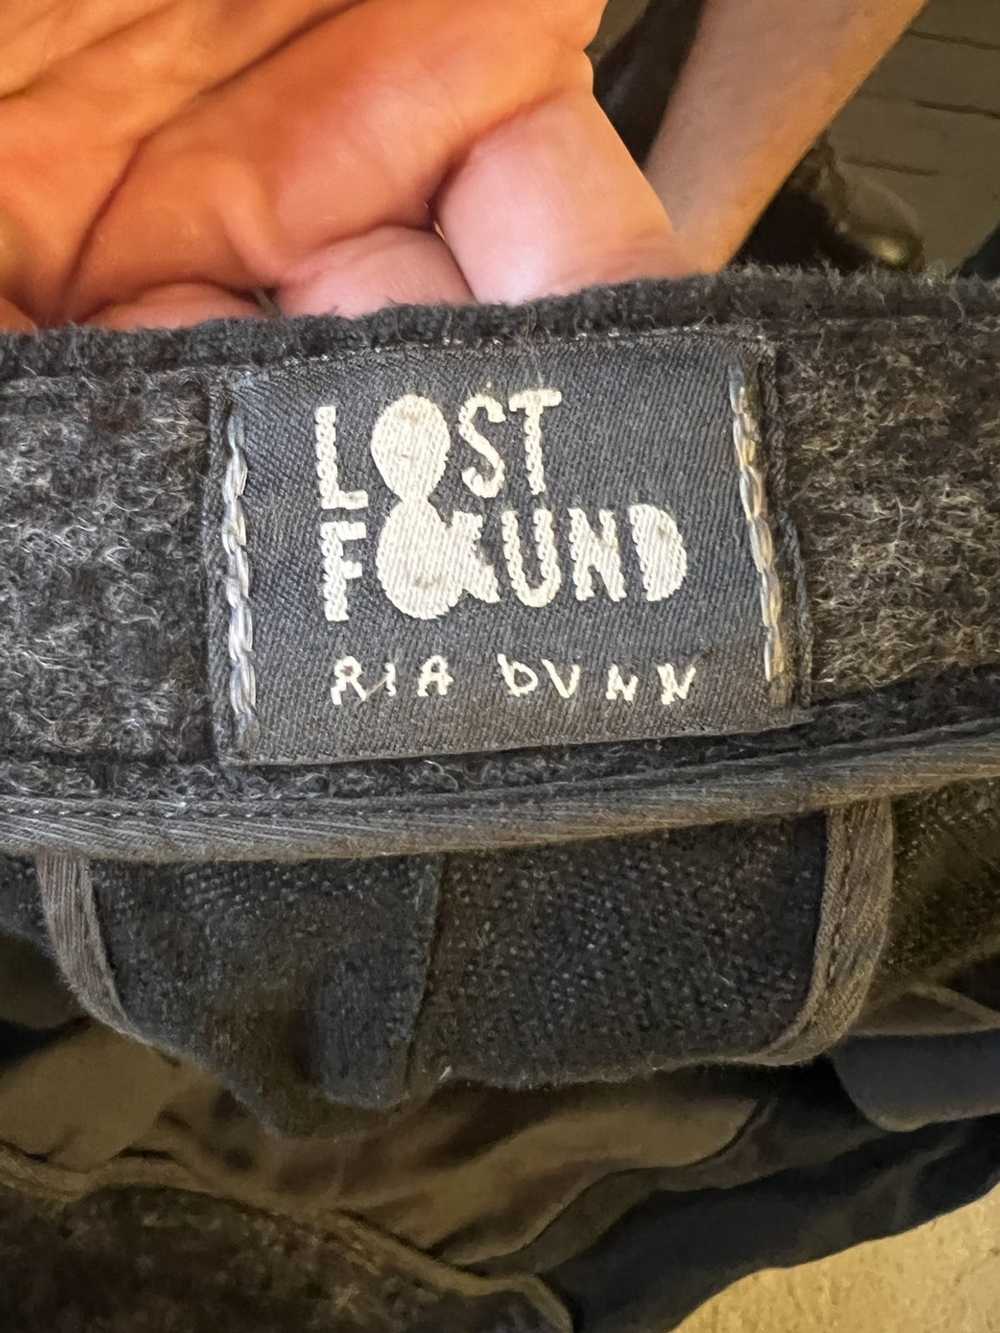 Lost & Found Ria Dunn Lost & found pants - image 6